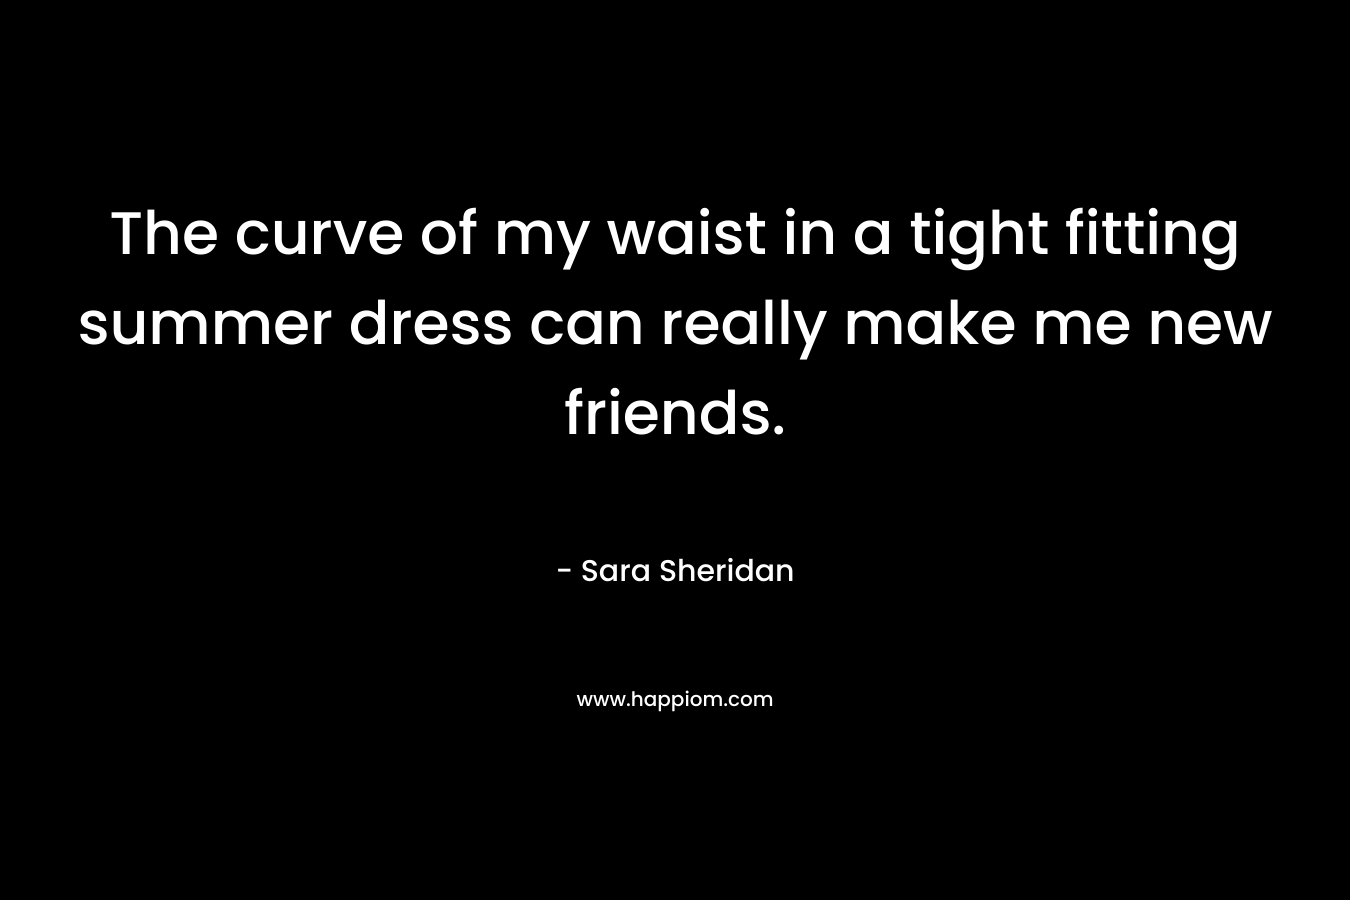 The curve of my waist in a tight fitting summer dress can really make me new friends. – Sara Sheridan